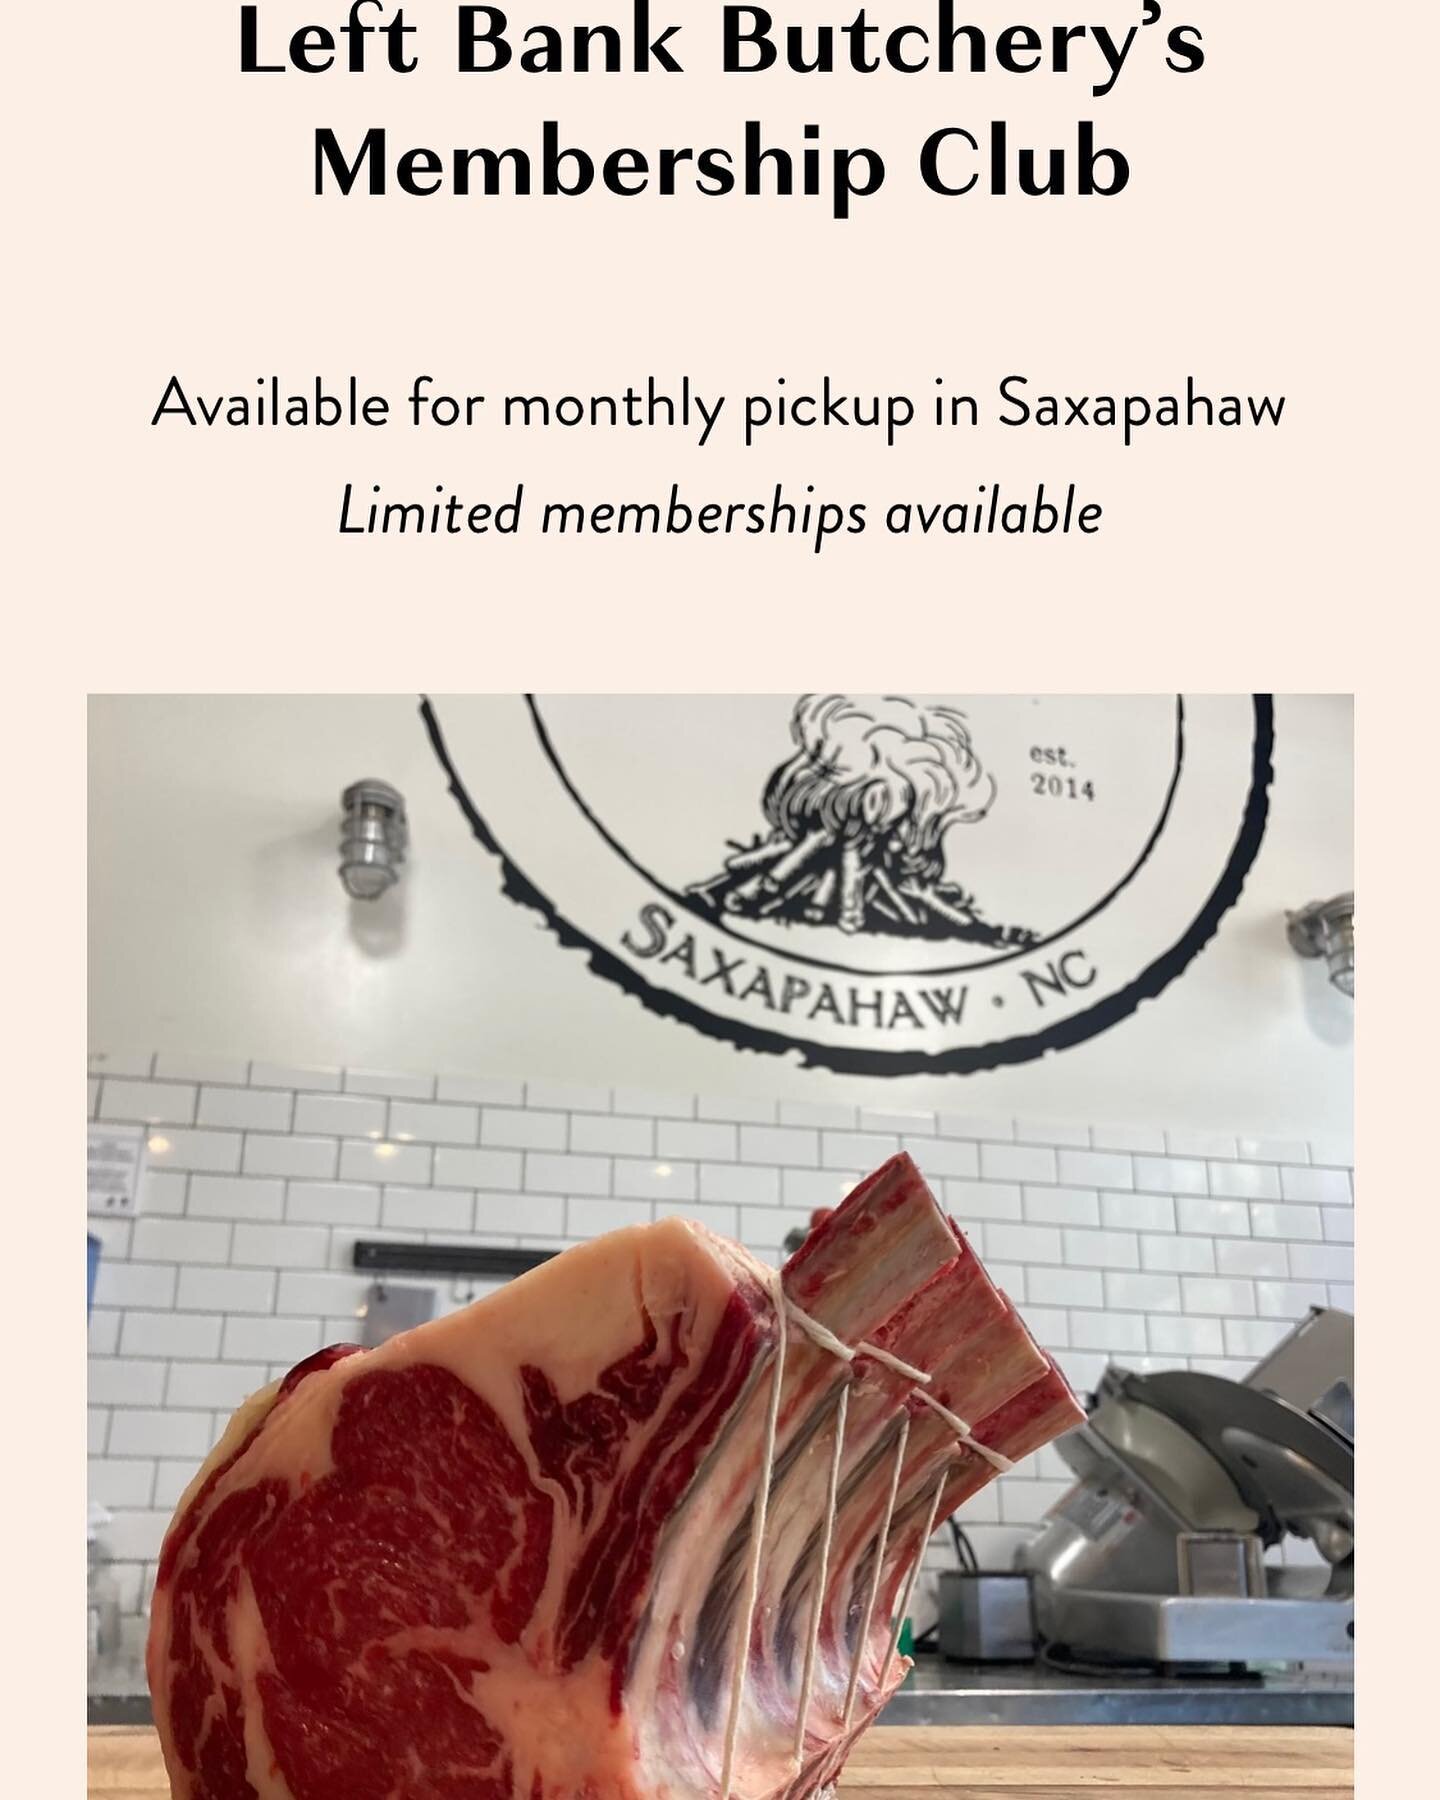 If you recently checked your inbox, hopefully you saw an email with some really exciting news from Saxapahaw! In collaboration with @table22, we are now offering a monthly membership club where you will be guaranteed excellent cuts, special one off p